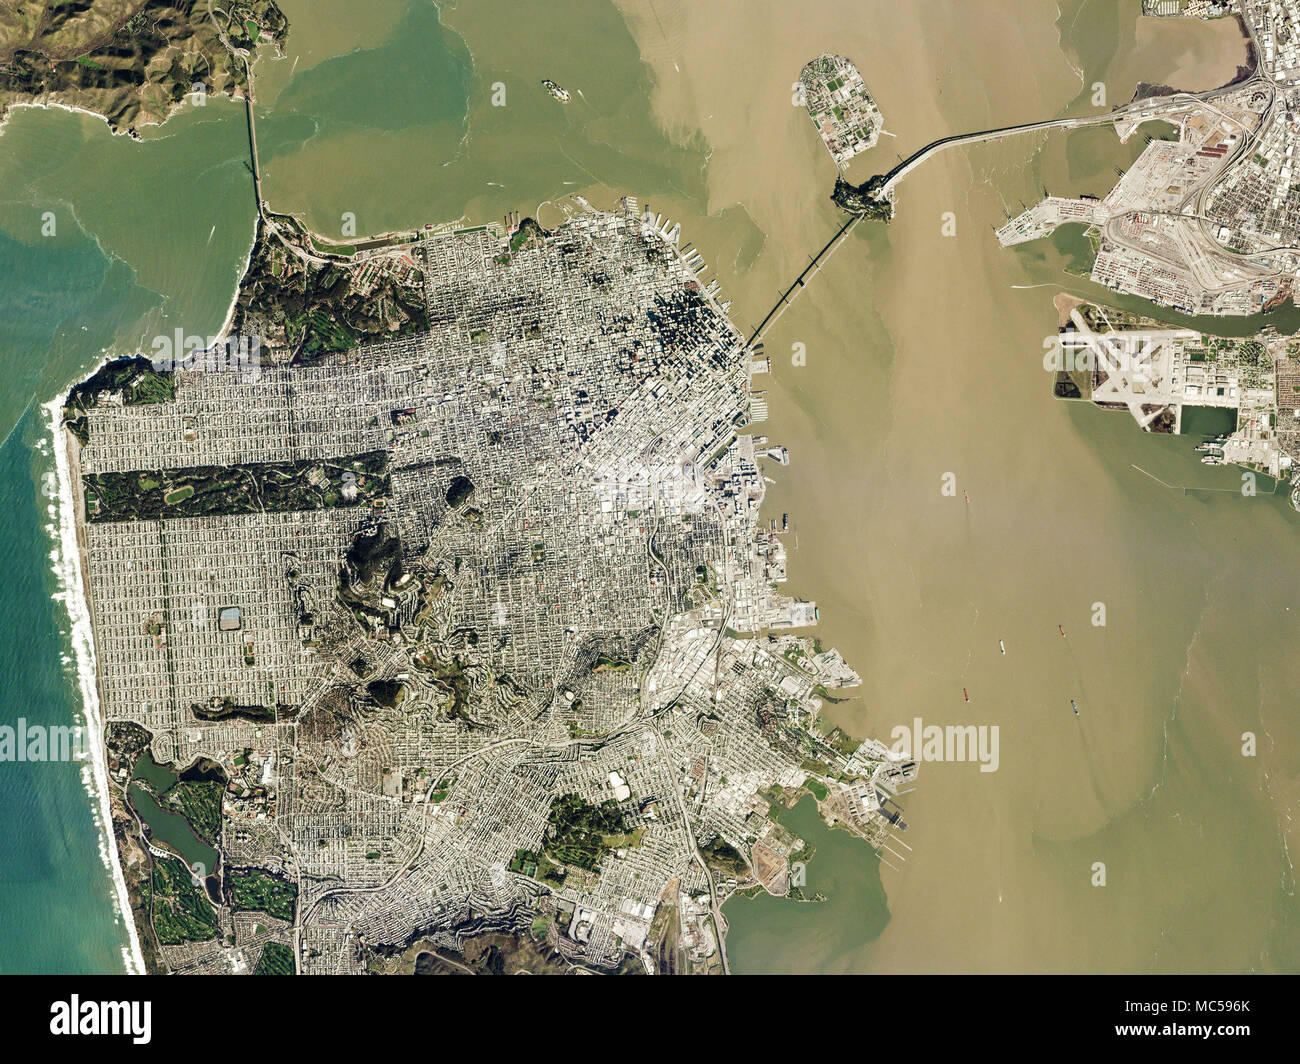 On a rare clear February day during California’s rainy 2017 winter, a satellite snapped this picture of Planet’s San Francisco headquarters. It shows not only the Golden Gate Bridge, top left, but also the sediment washed by rains from the 4,600 square miles of the watershed muddying the San Francisco Bay. A scientist measuring how water quality changes as runoff increases could supplement data from water samples with satellite imagery from the same days—since Planet re-images the entire planet every day—to develop a broader understanding of the daily impact of sediment. (Image courtesy of Pla Stock Photo